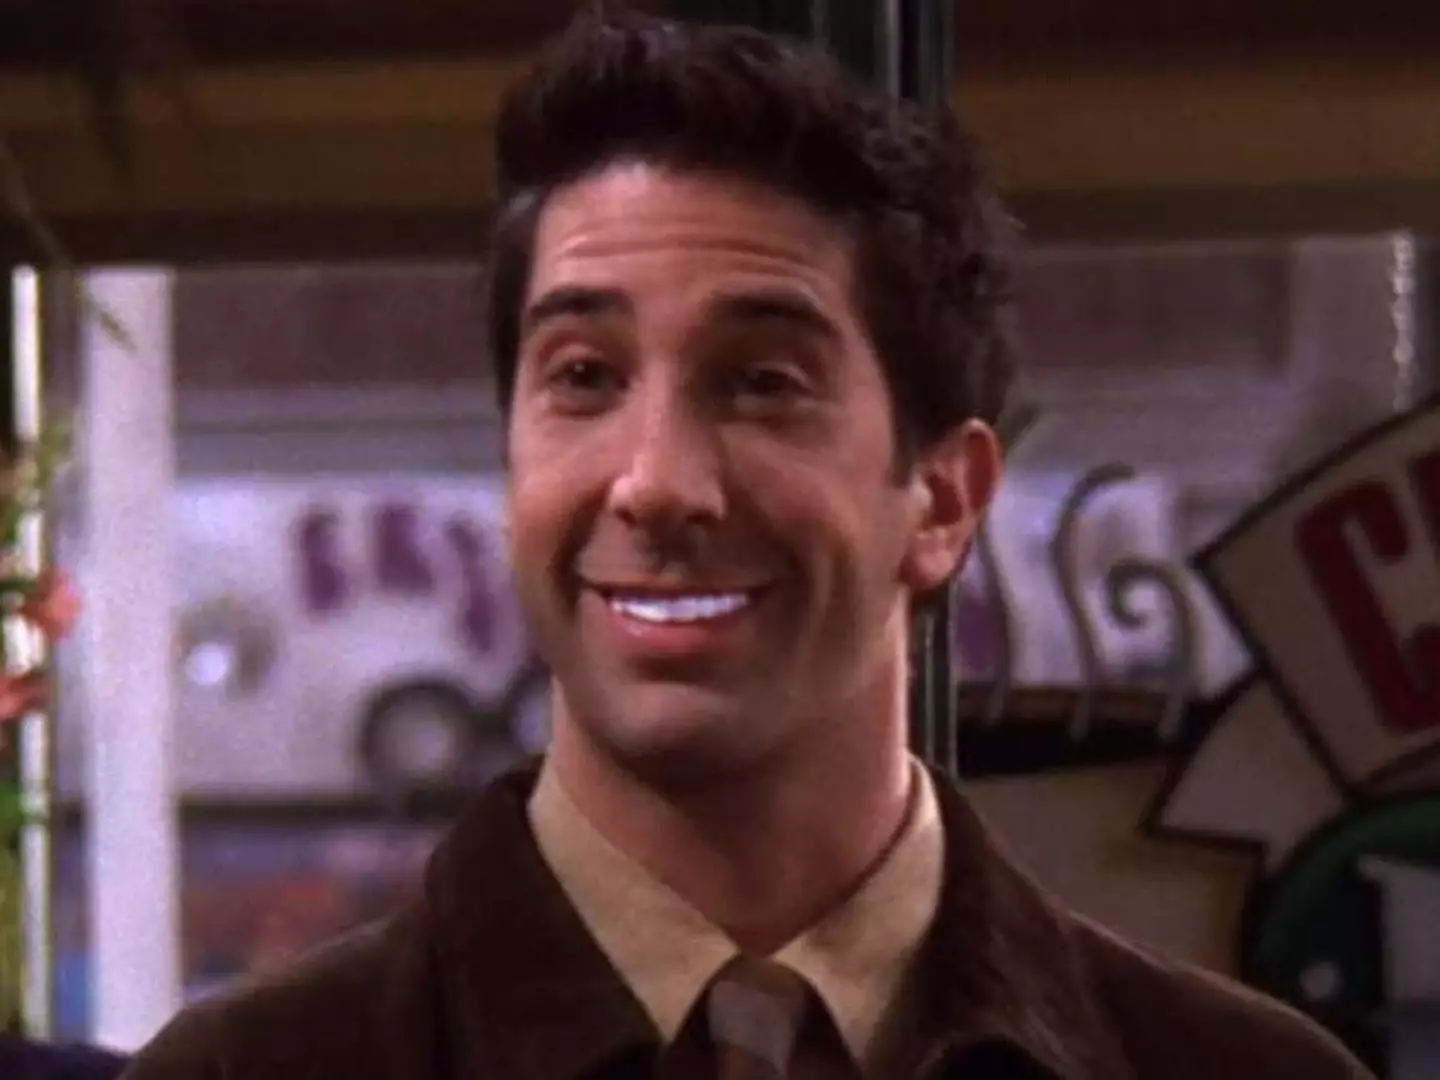 The famous Friends episode comes to mind when Ross' teeth whitening goes horrible wrong.